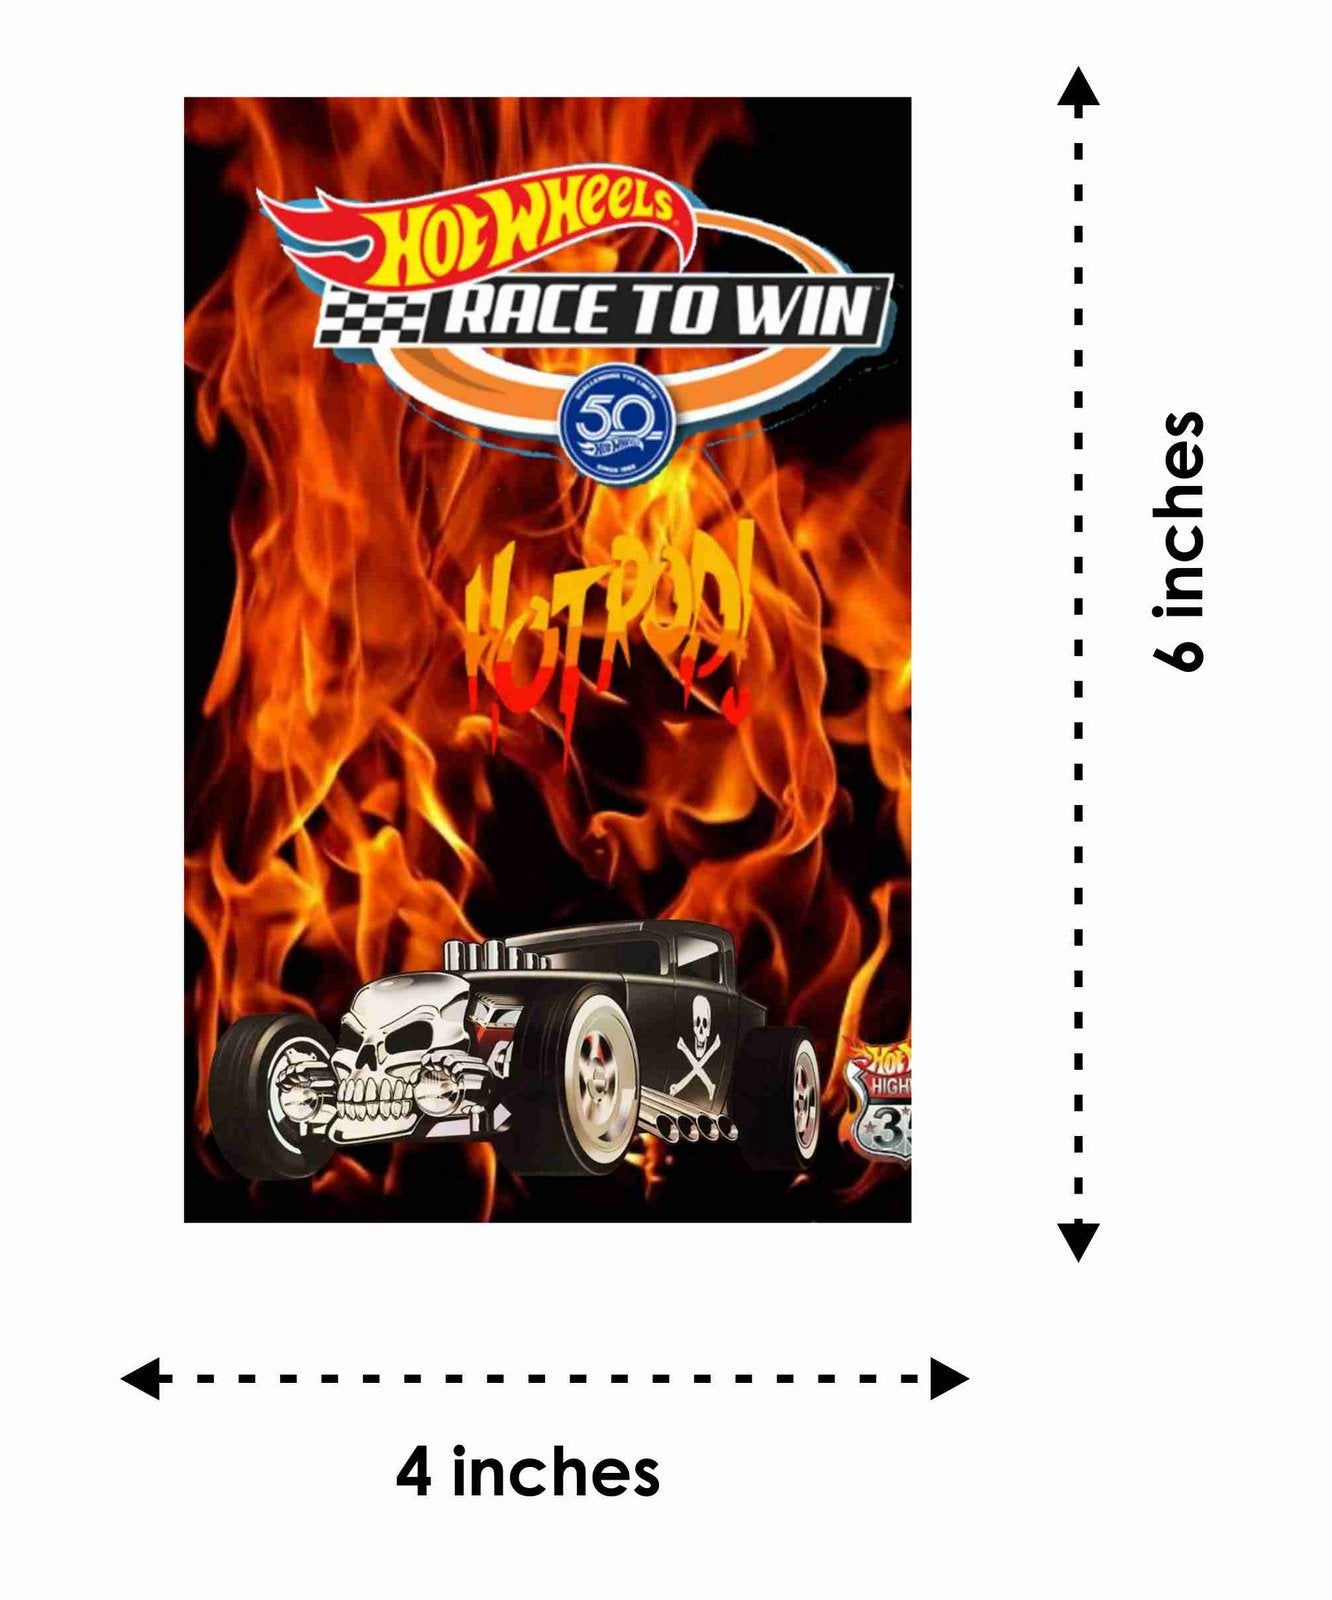 Hot Wheels Theme Children's Birthday Party Invitations Cards with Envelopes - Kids Birthday Party Invitations for Boys or Girls,- Invitation Cards (Pack of 10)